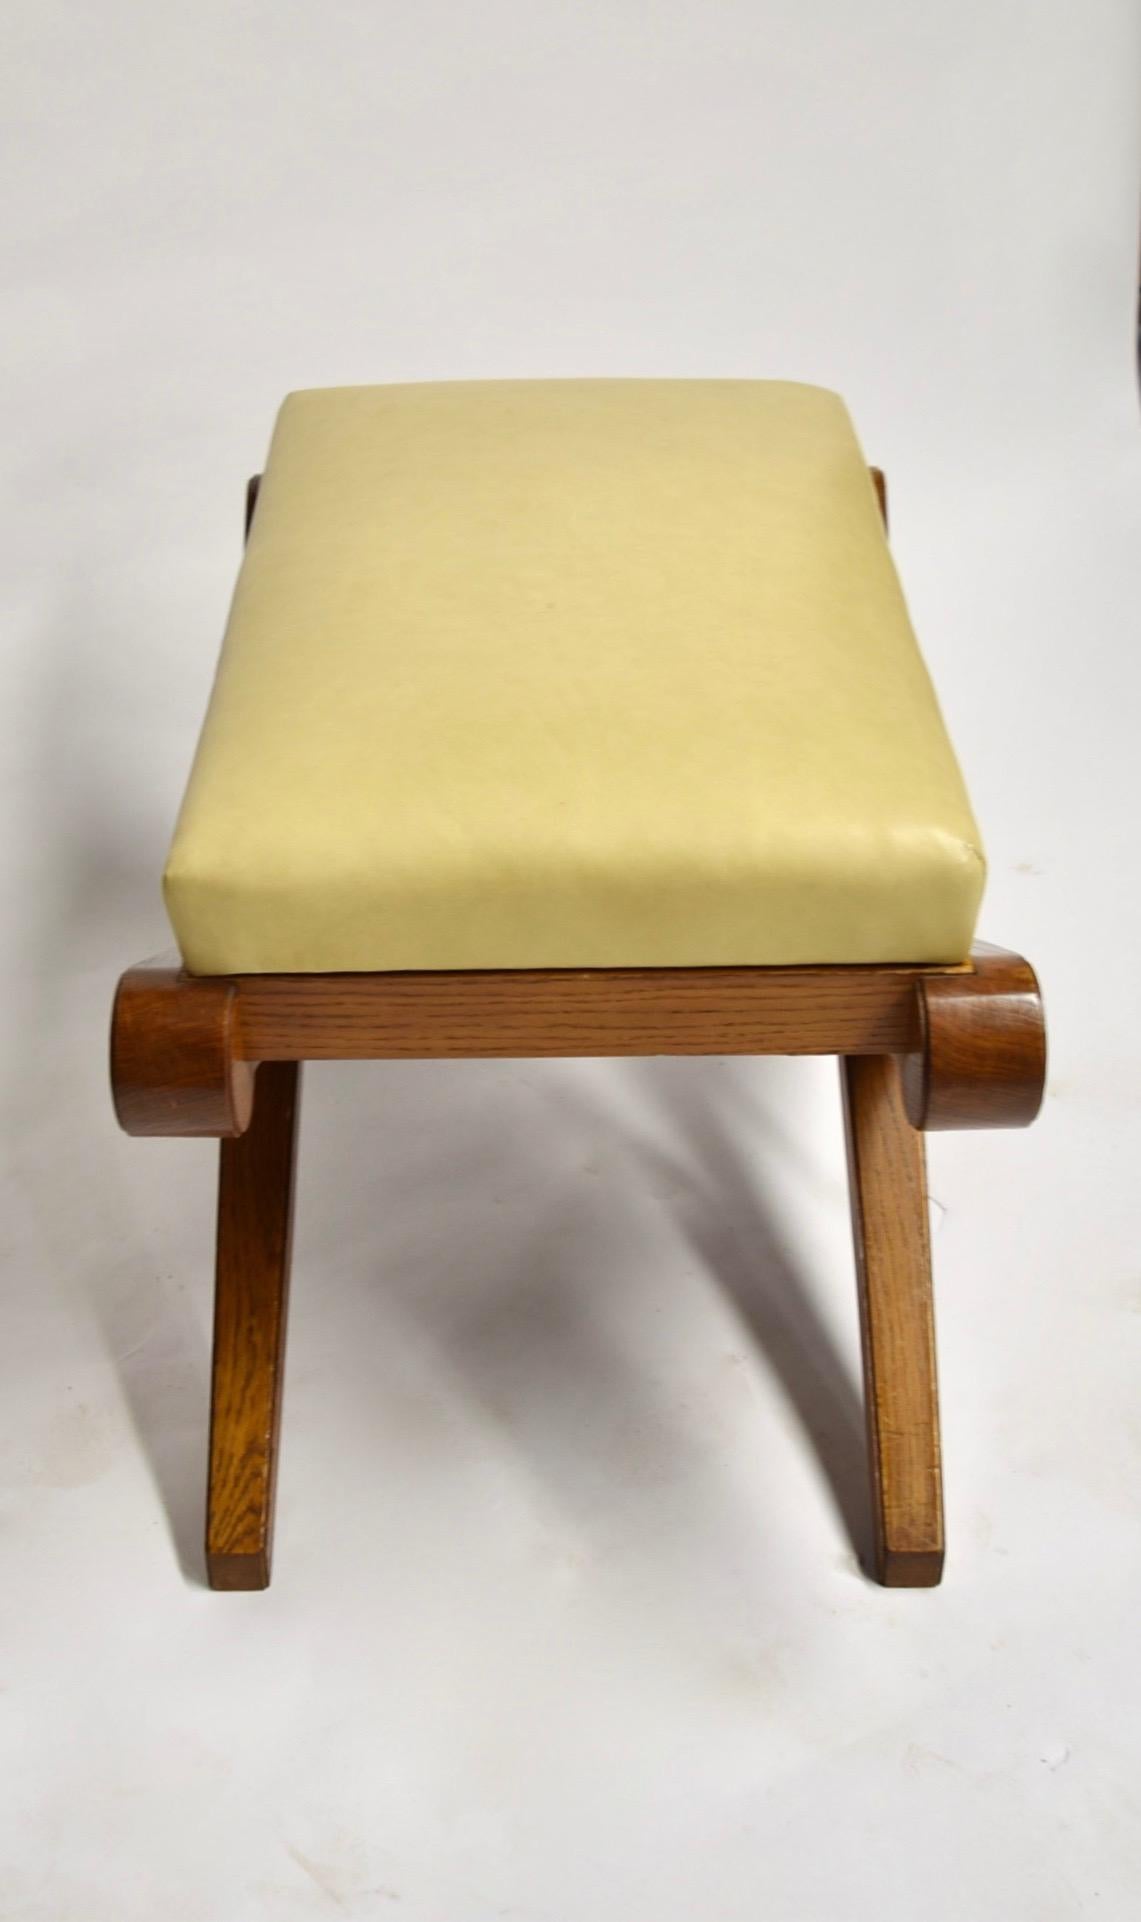 Mid-20th Century French Deco Bench / Footstool, circa 1930 Made in France For Sale